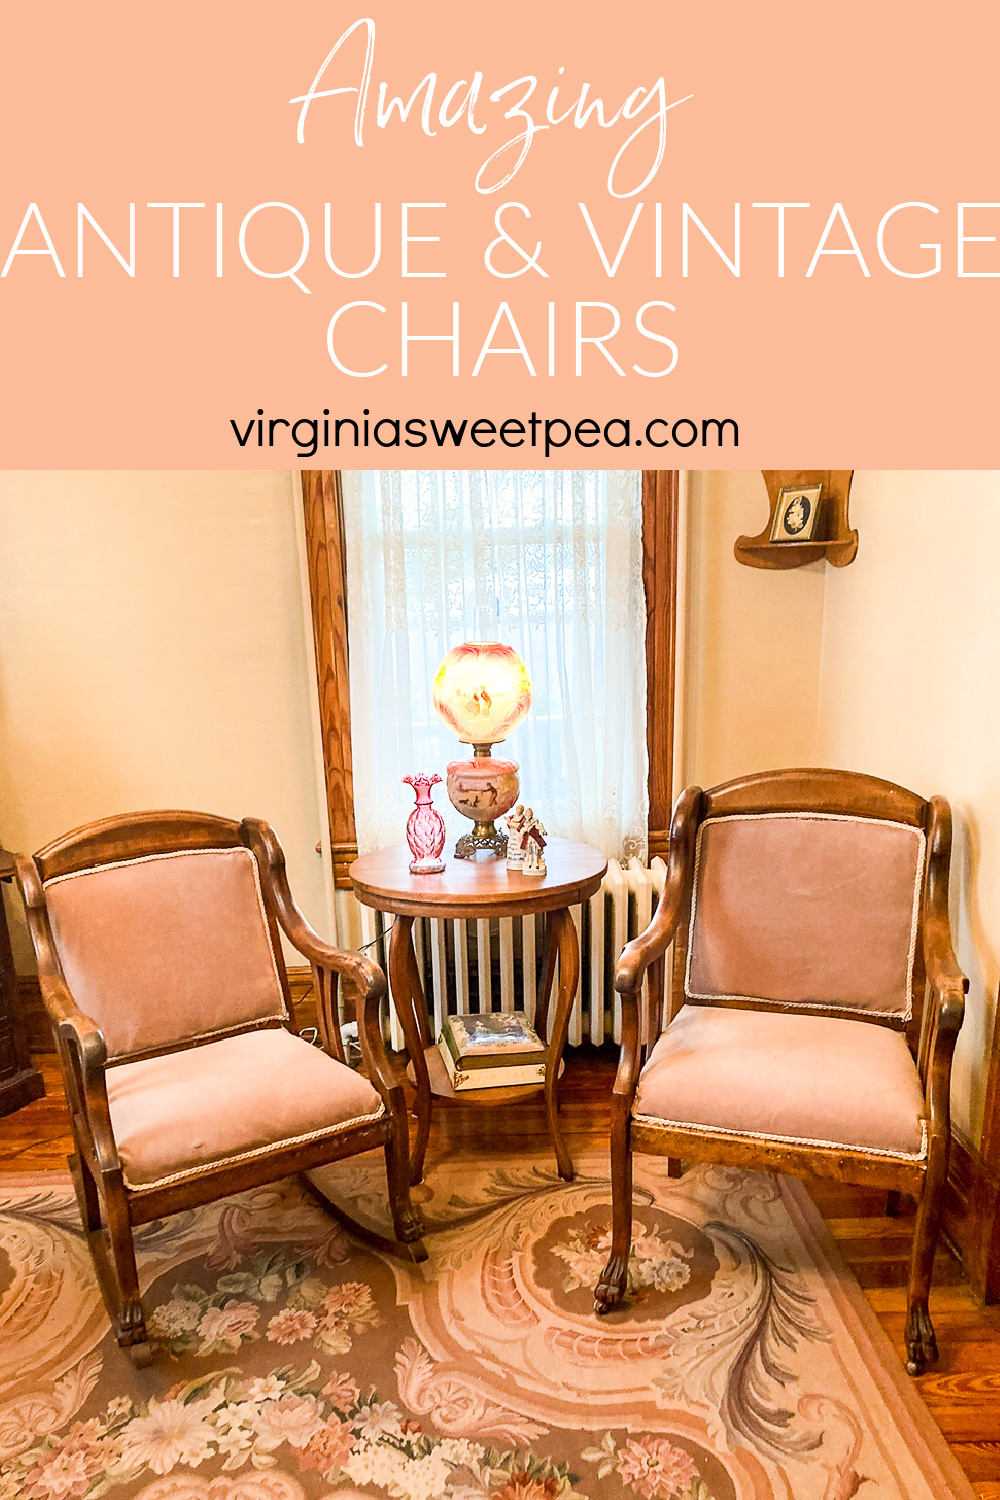 Set of two antique chairs in a parlor